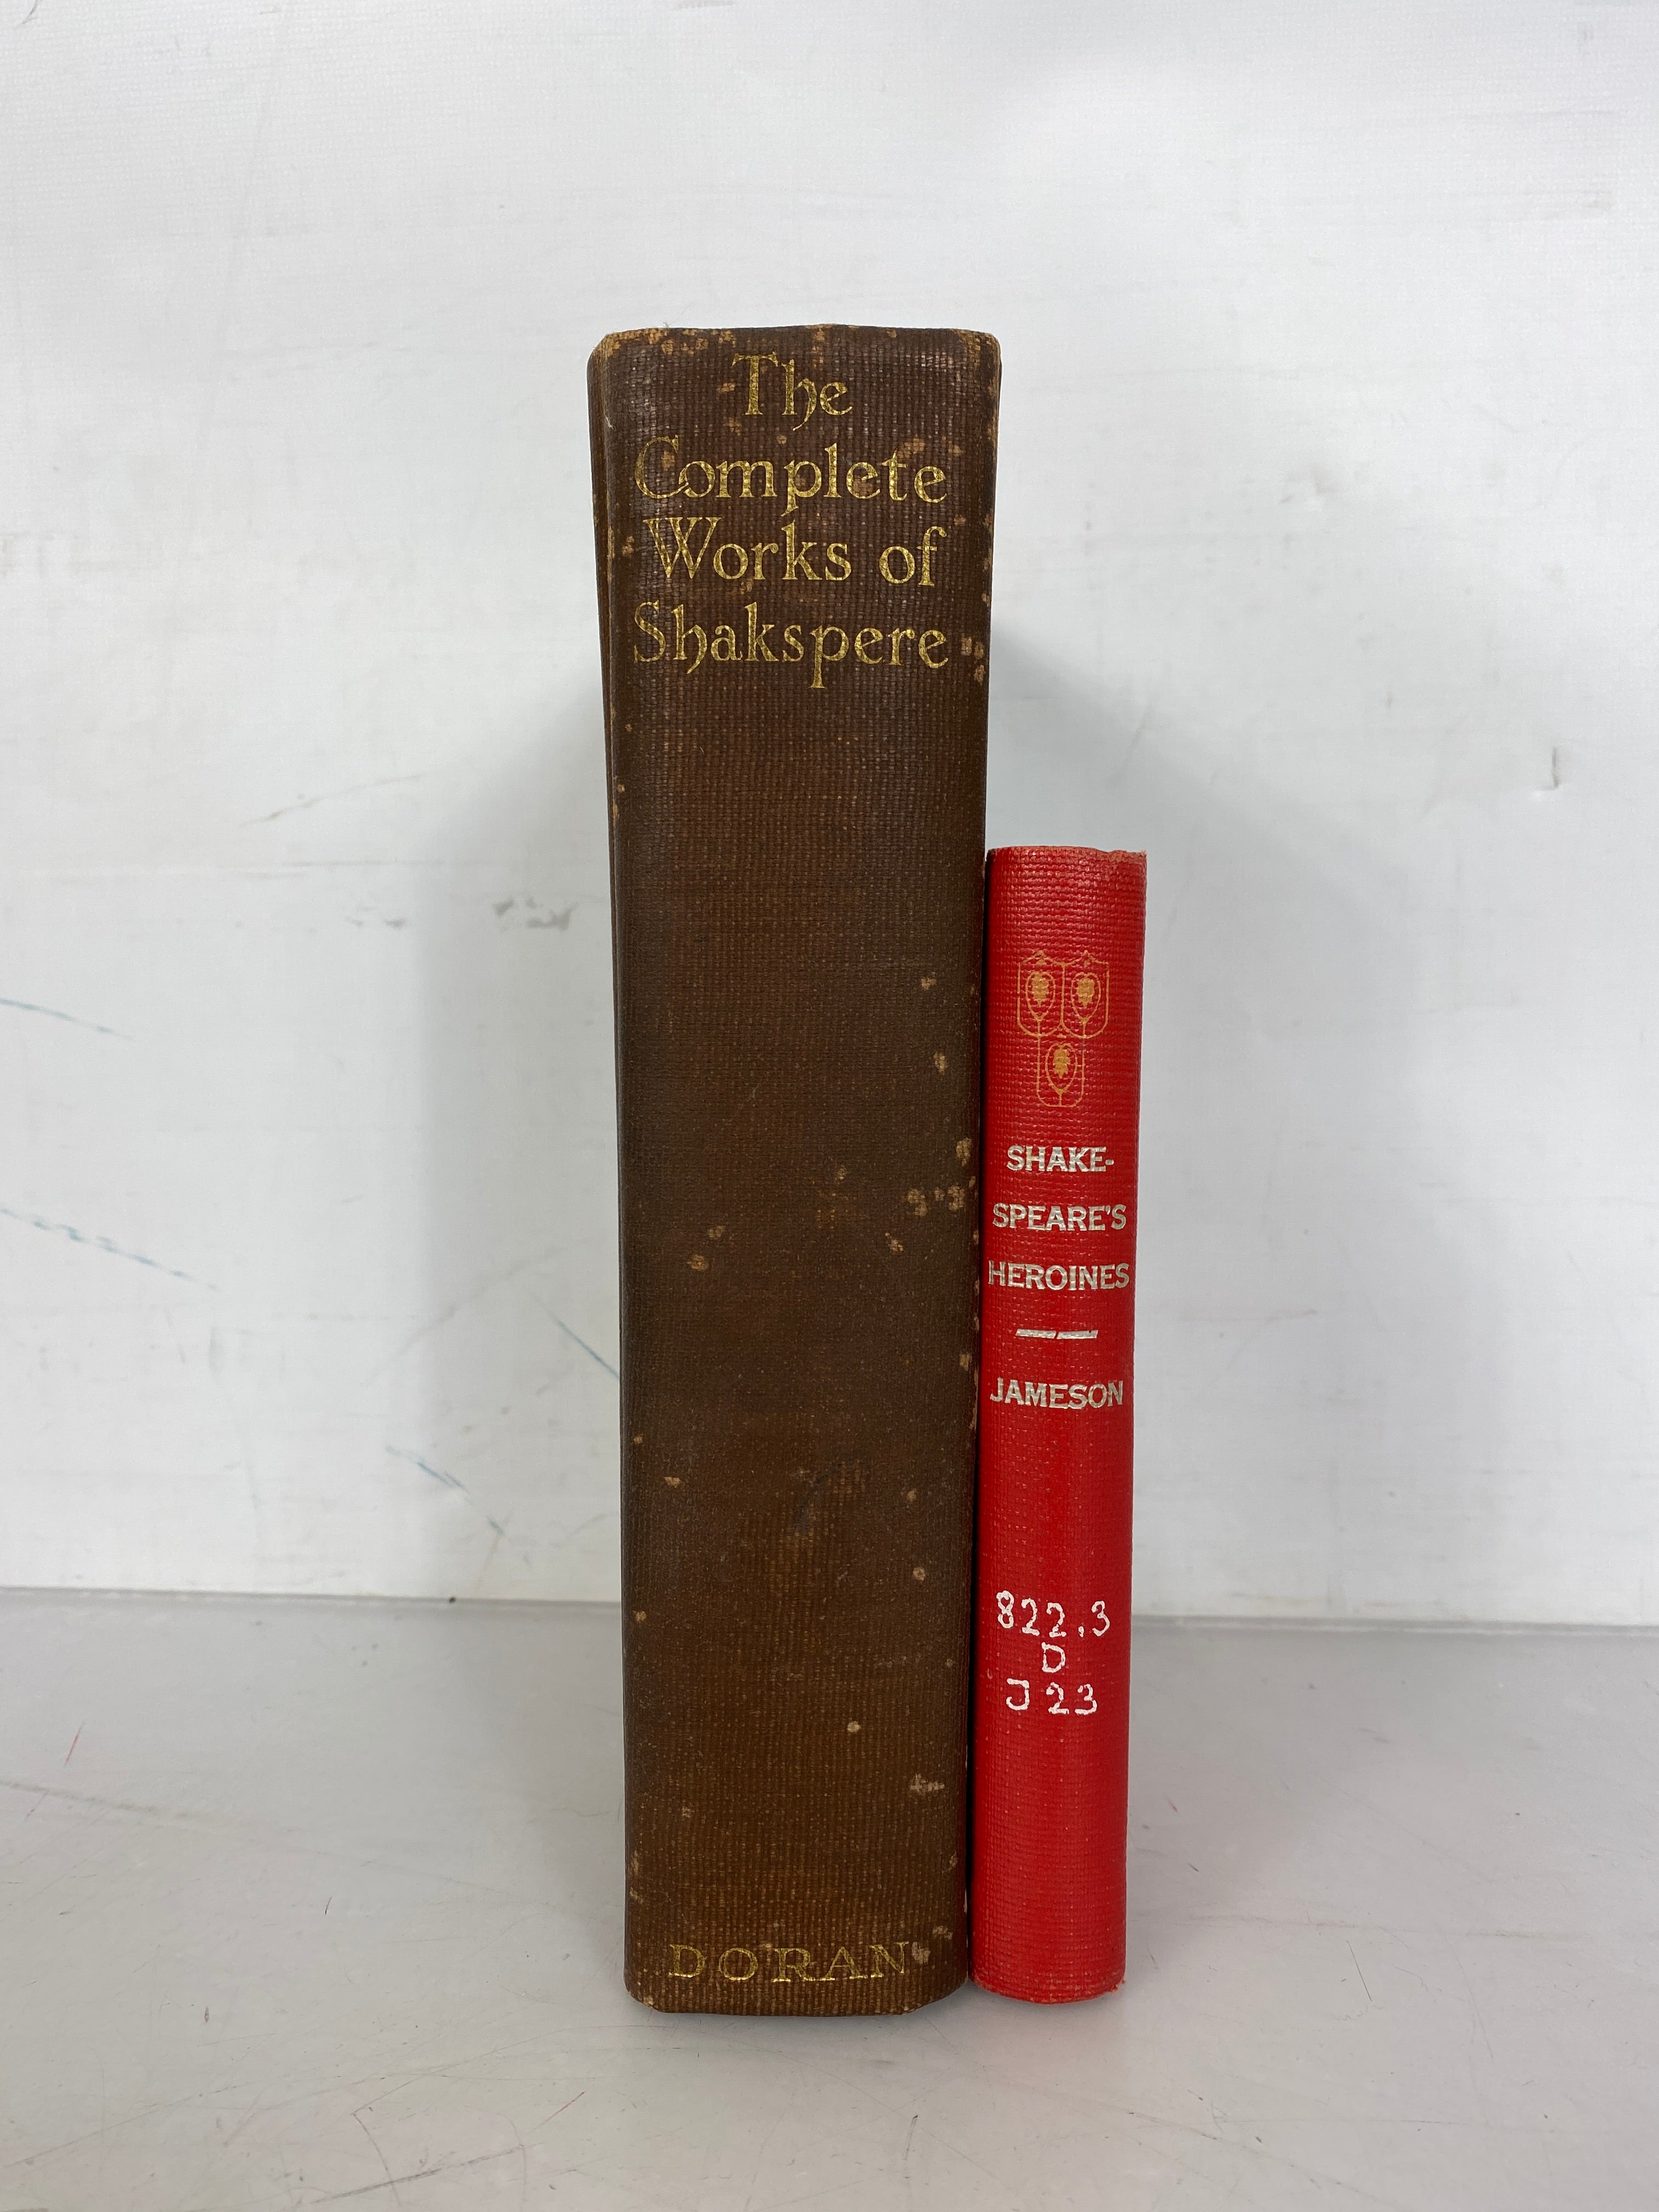 Lot of 2 Shakespeare Books Complete Works and Heroines (1930) HC